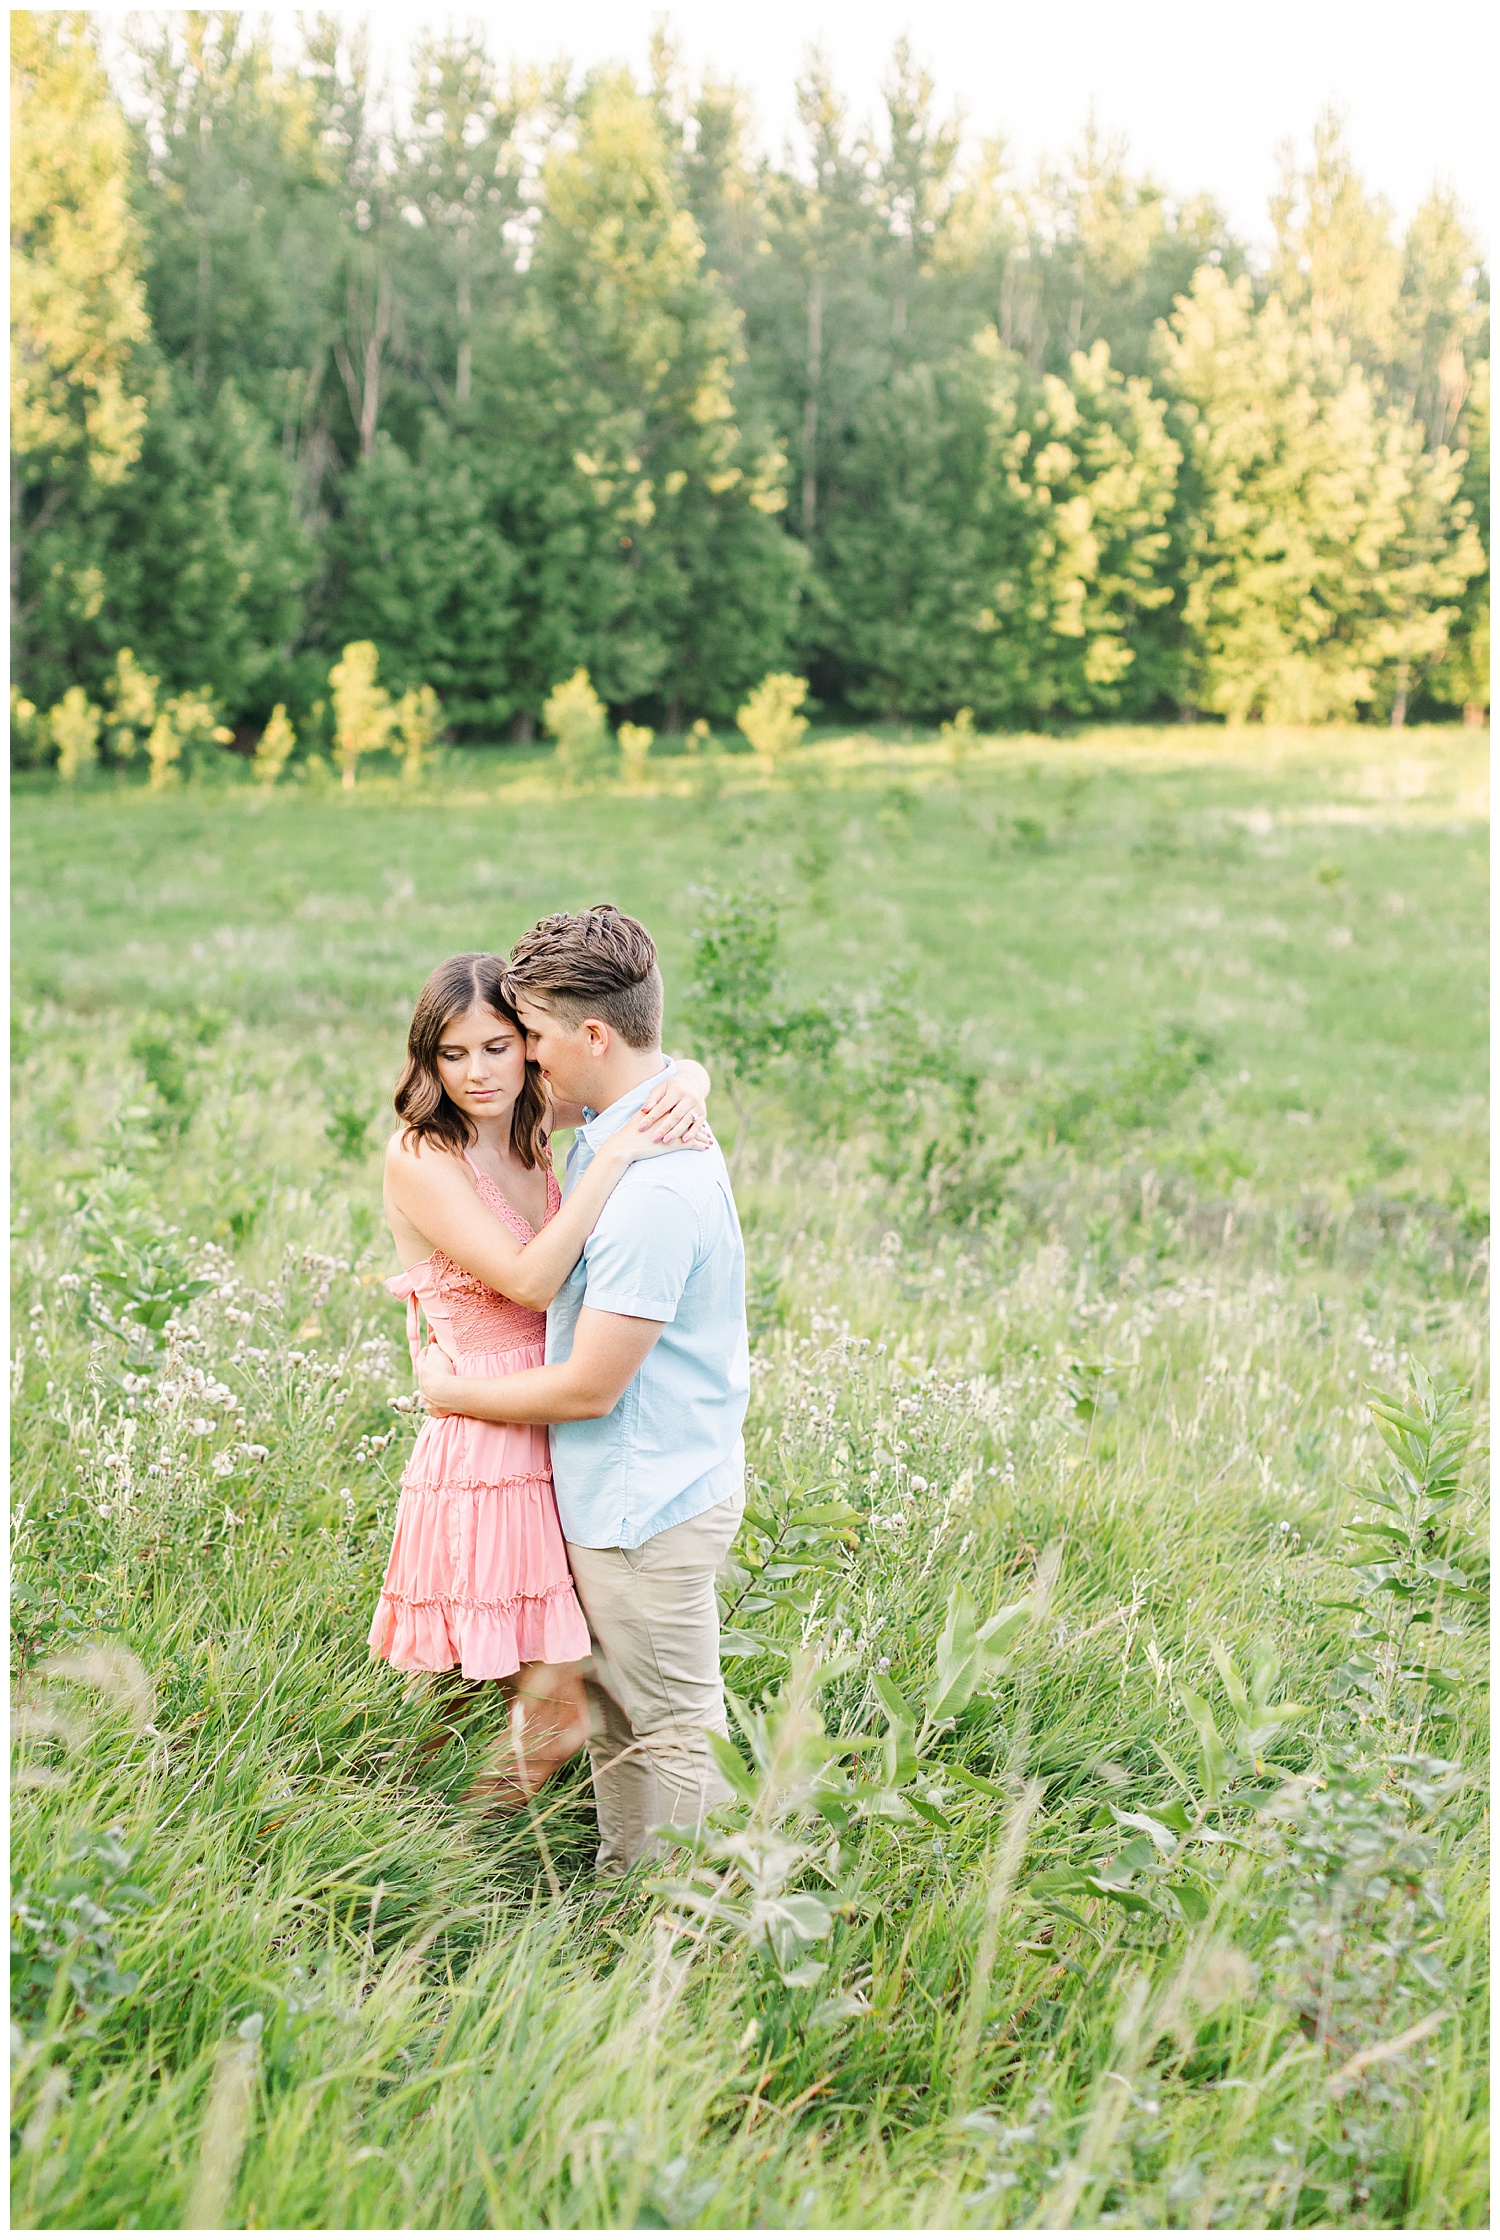 Jadi and Luke embrace each other in a beautiful grassy pasture with epic views | CB Studio